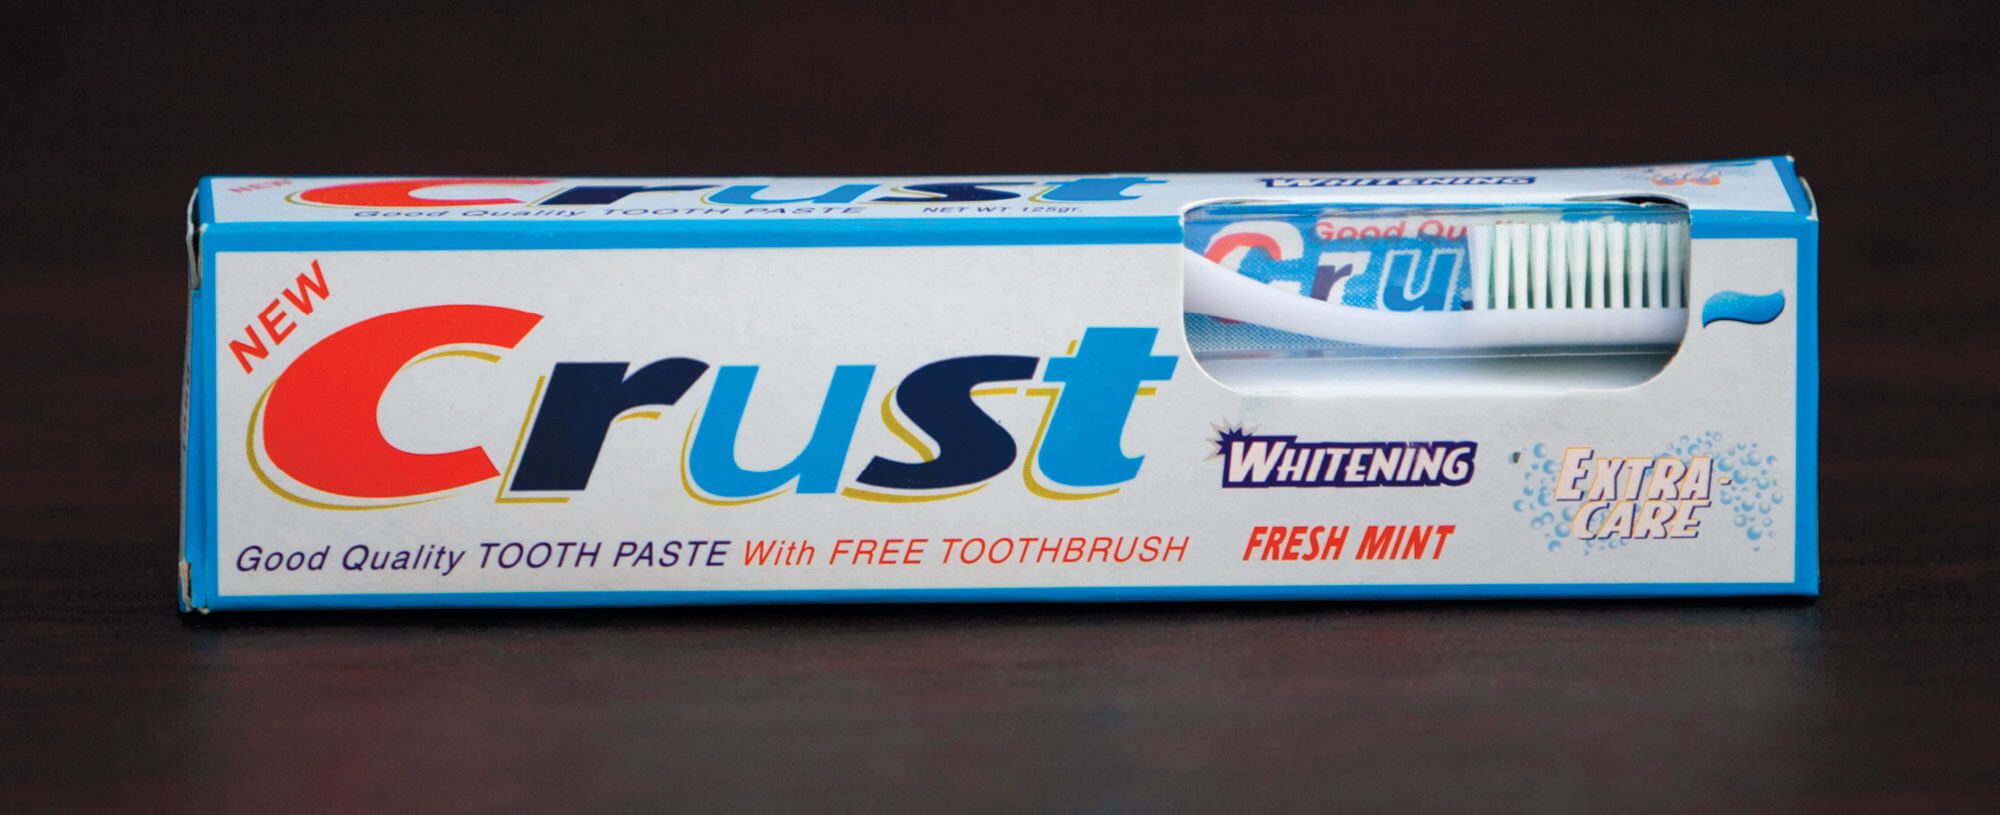 Box of Crust toothpaste with the branding of Crest toothpaste.